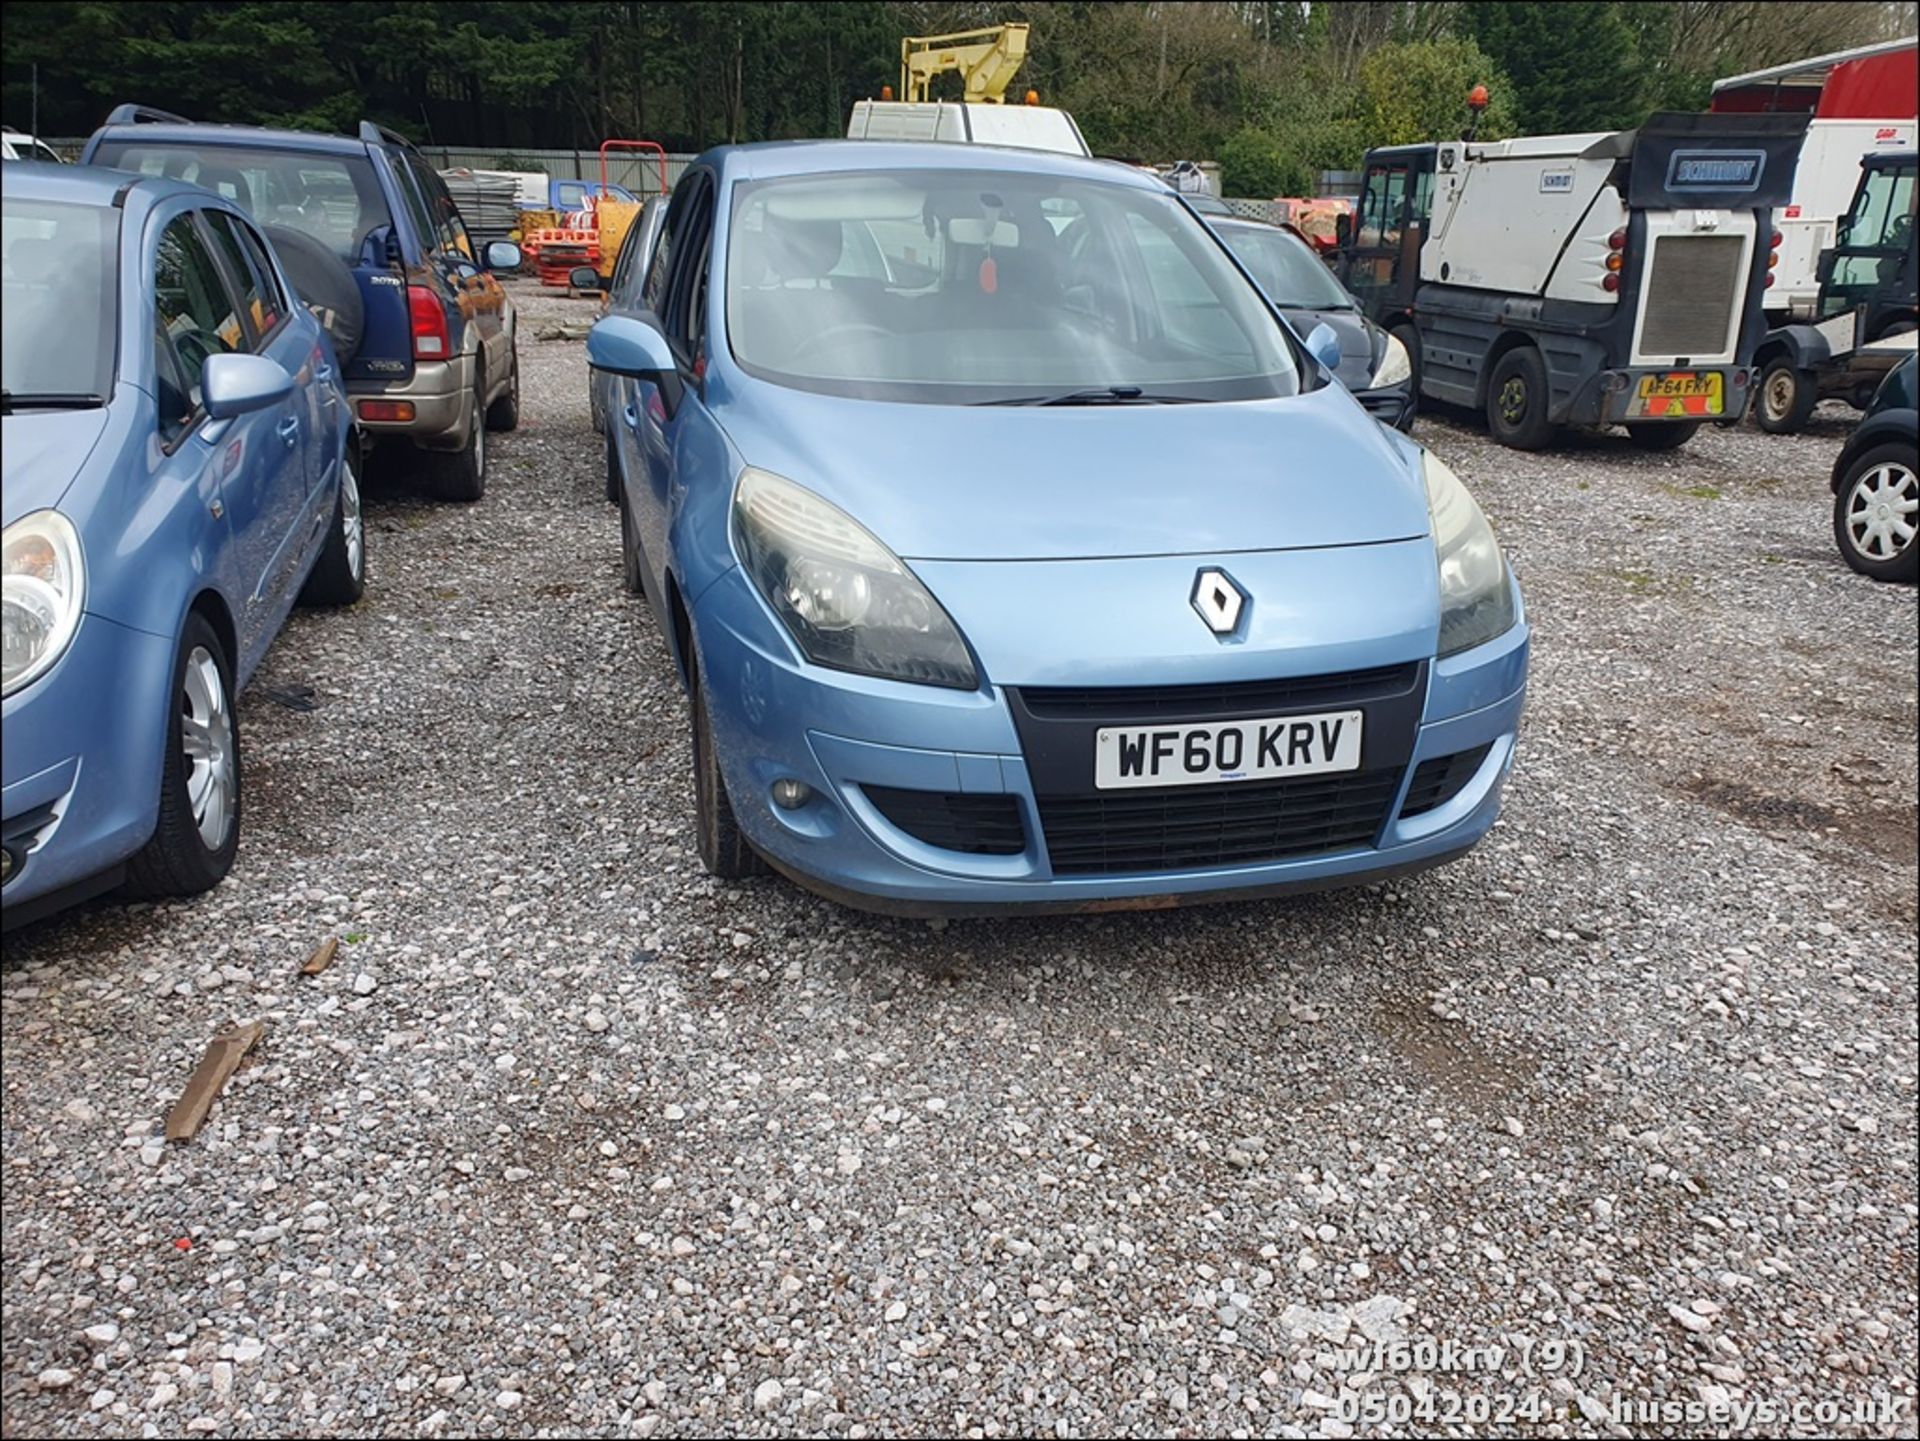 10/60 RENAULT SCENIC EXPRESSION DCI 105 - 1461cc 5dr MPV (Blue) - Image 10 of 50